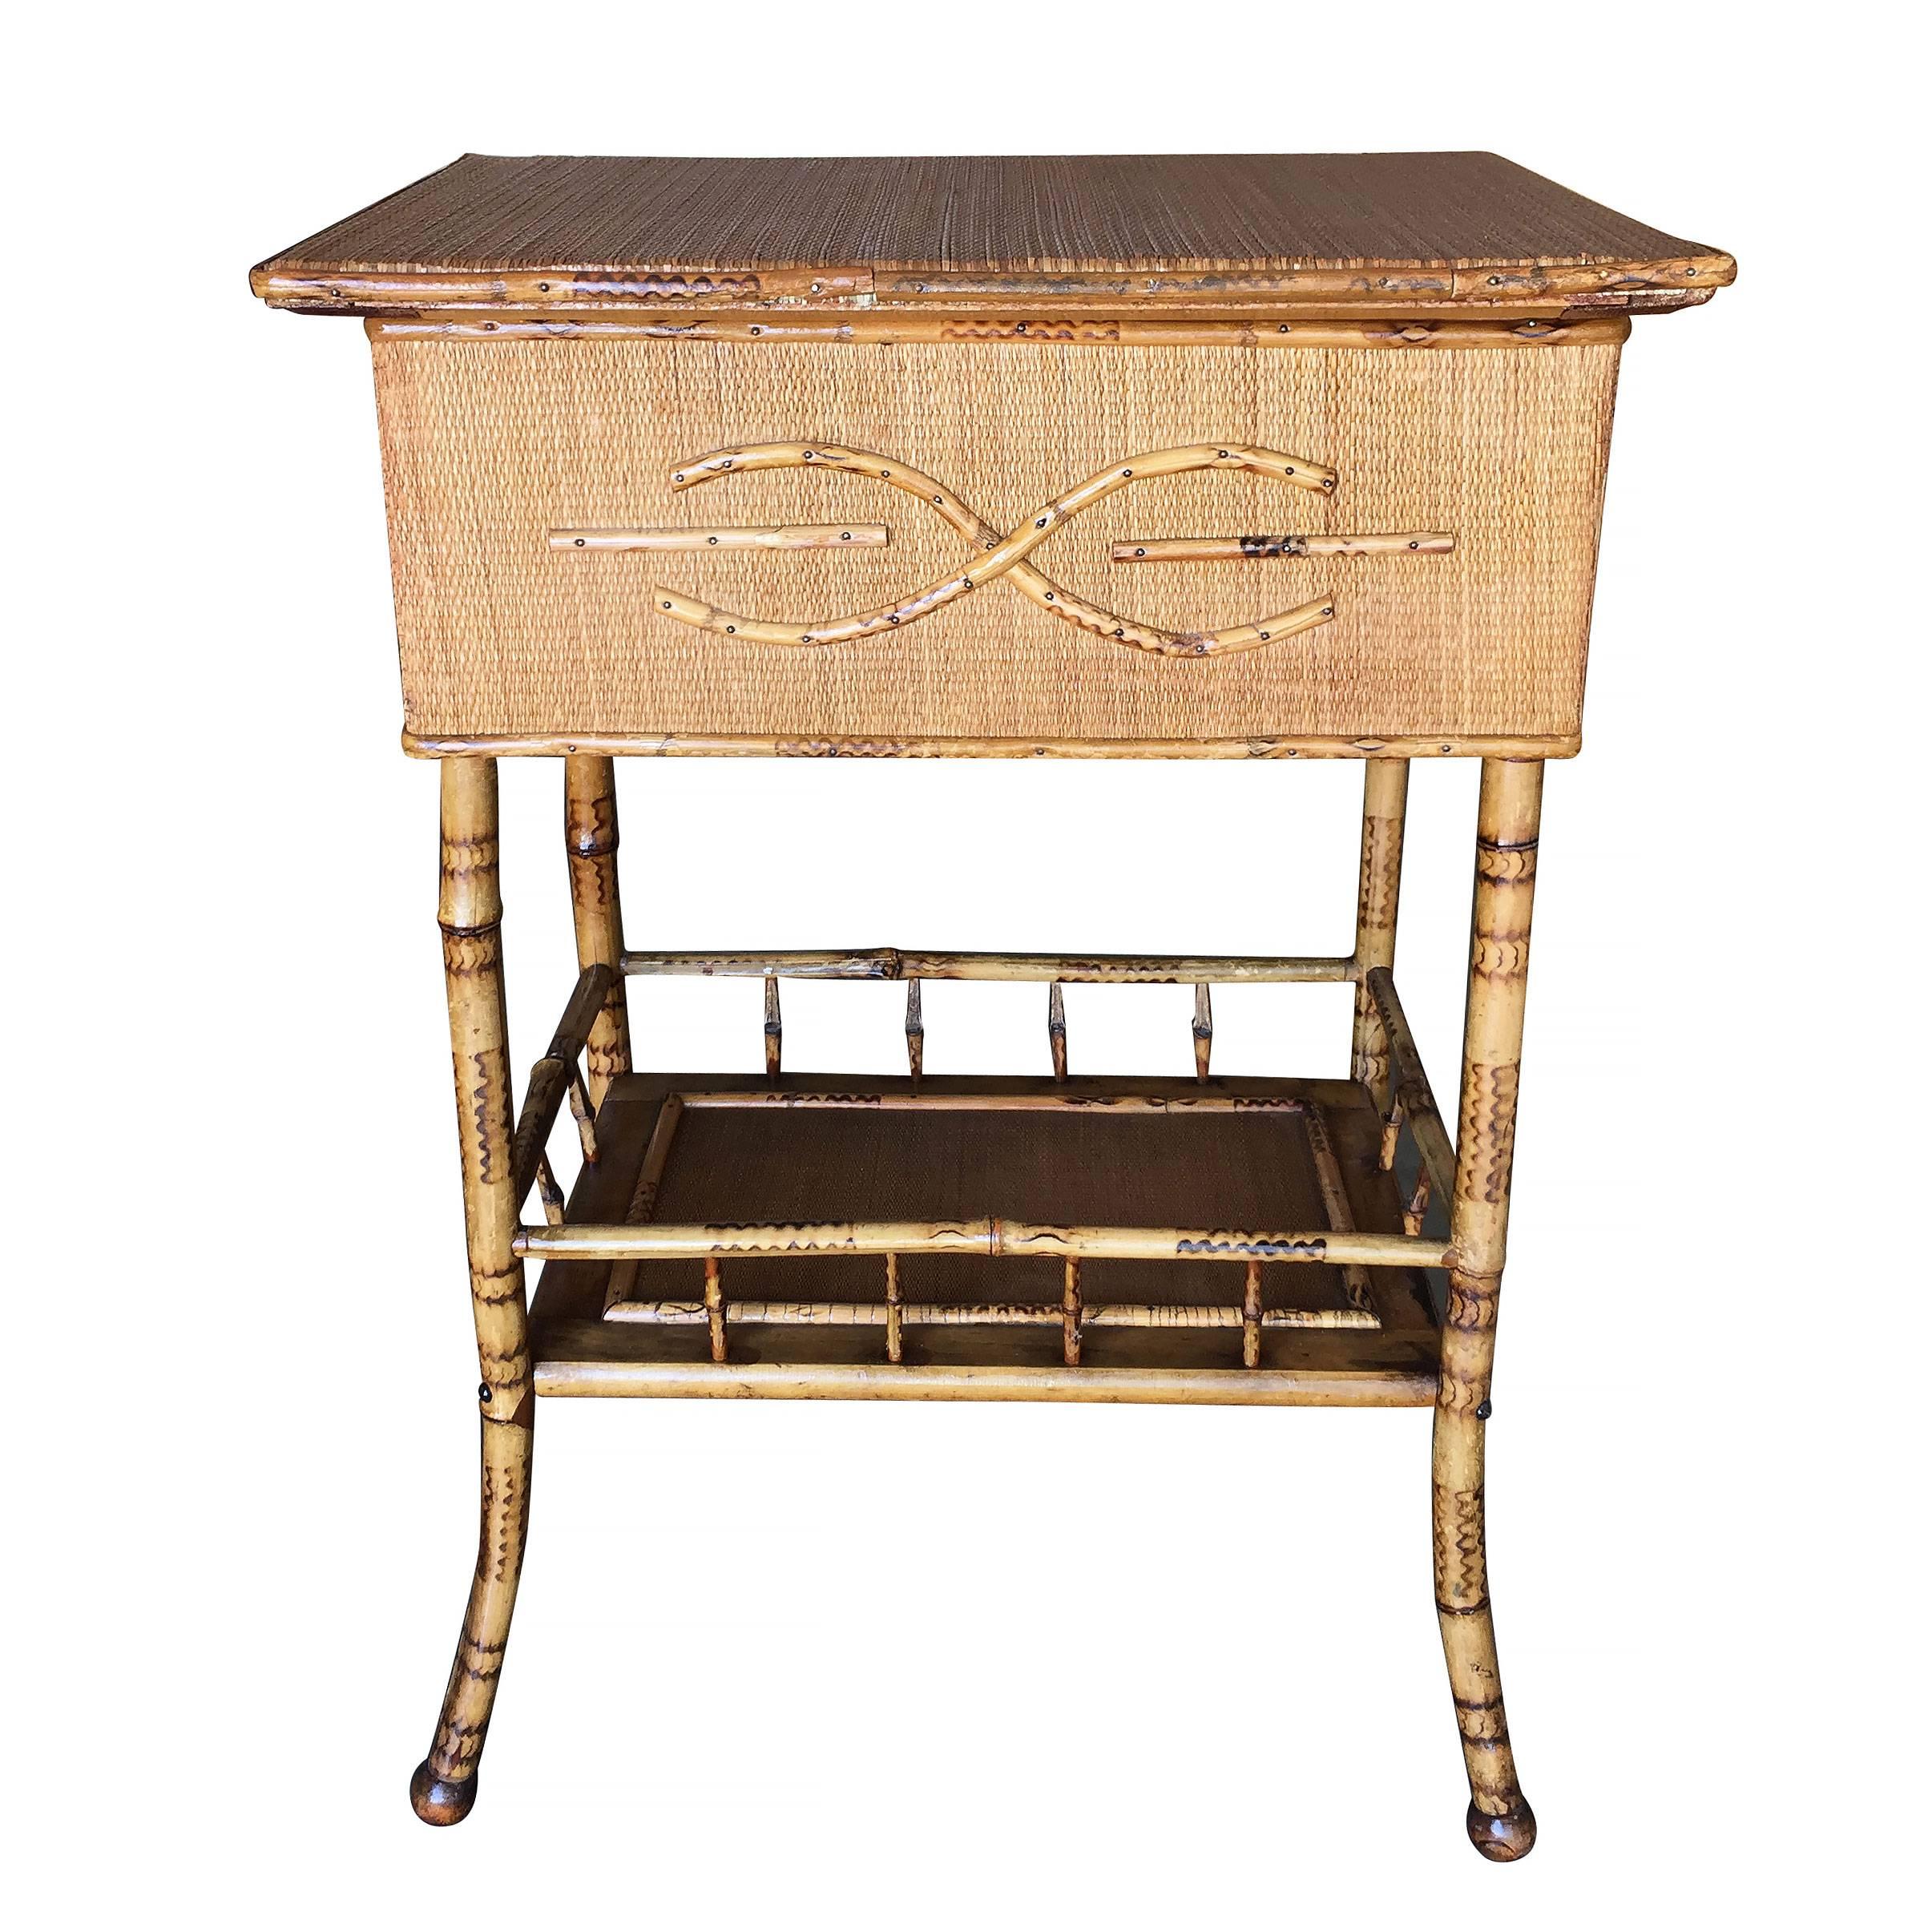 Antique tiger bamboo pedestal side table with rice mat top with flip open lid storage and a secondary bottom shelf.

Restored to new for you.

All rattan, bamboo and wicker furniture has been painstakingly refurbished to the highest standards with